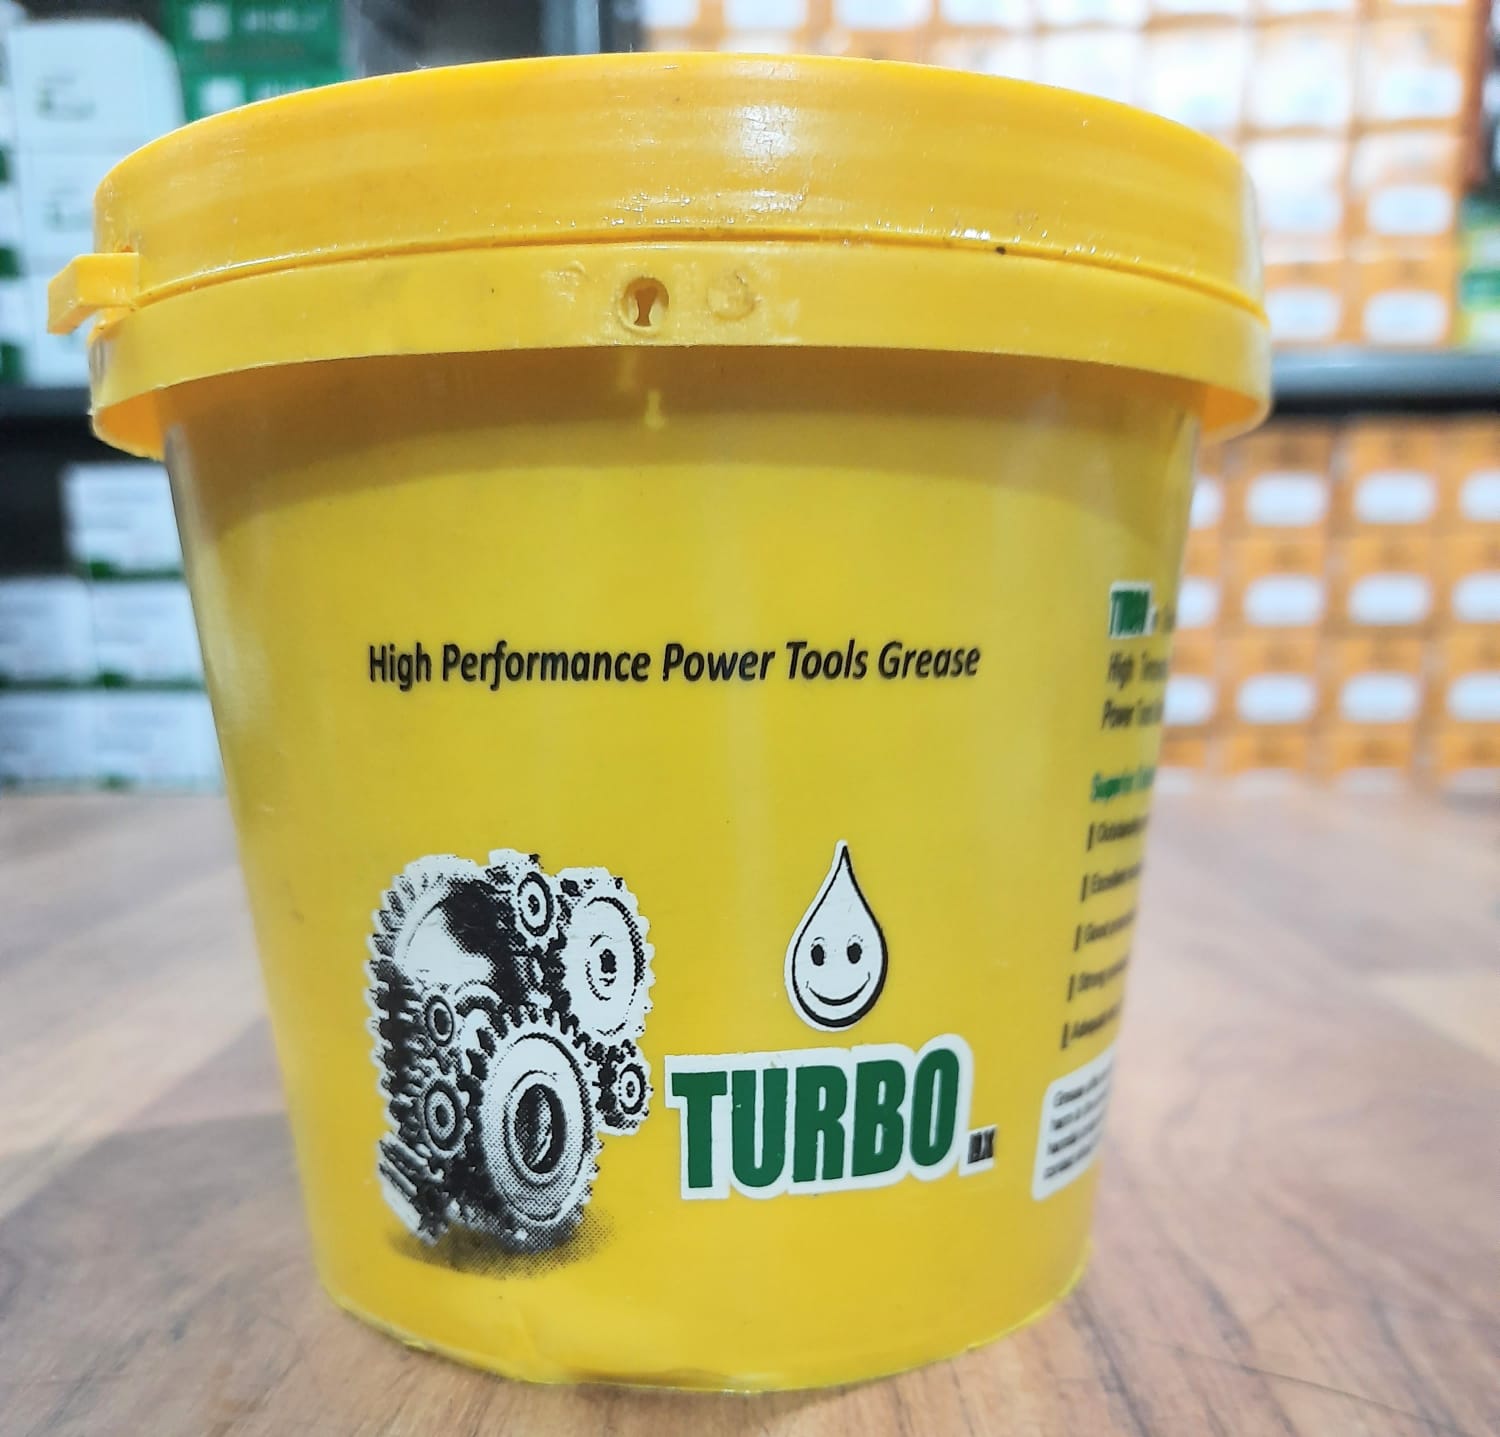 Turbo High Performance Power Tools Grease 500gms